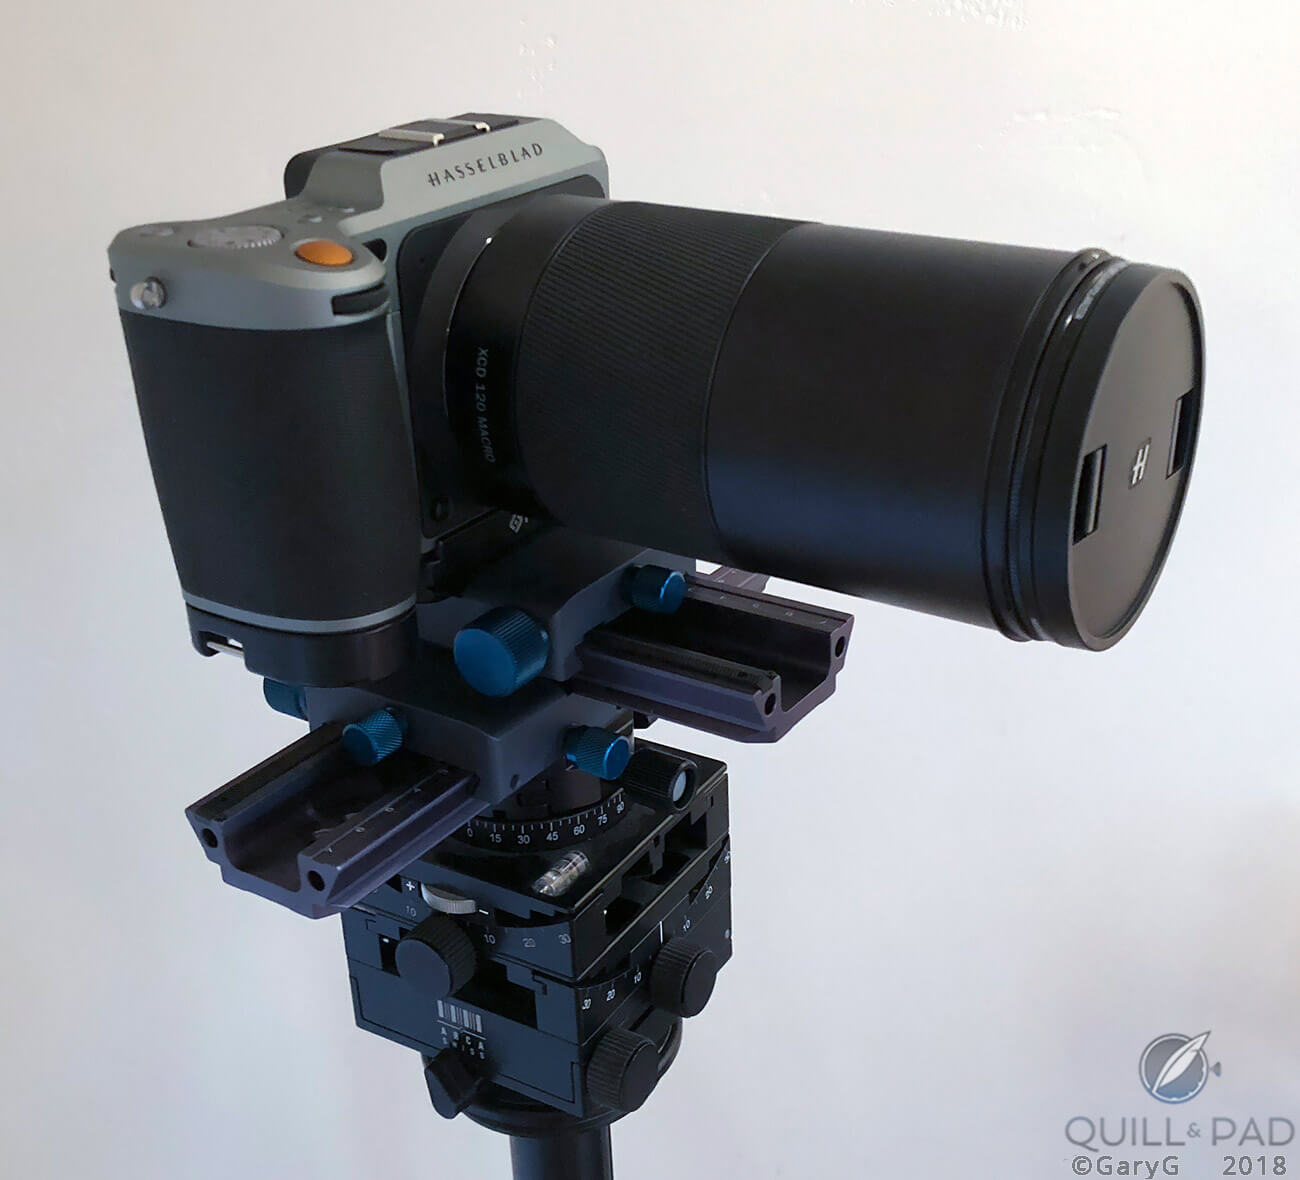 A bit slow to start: Hasselblad X1D with XCD120 macro lens